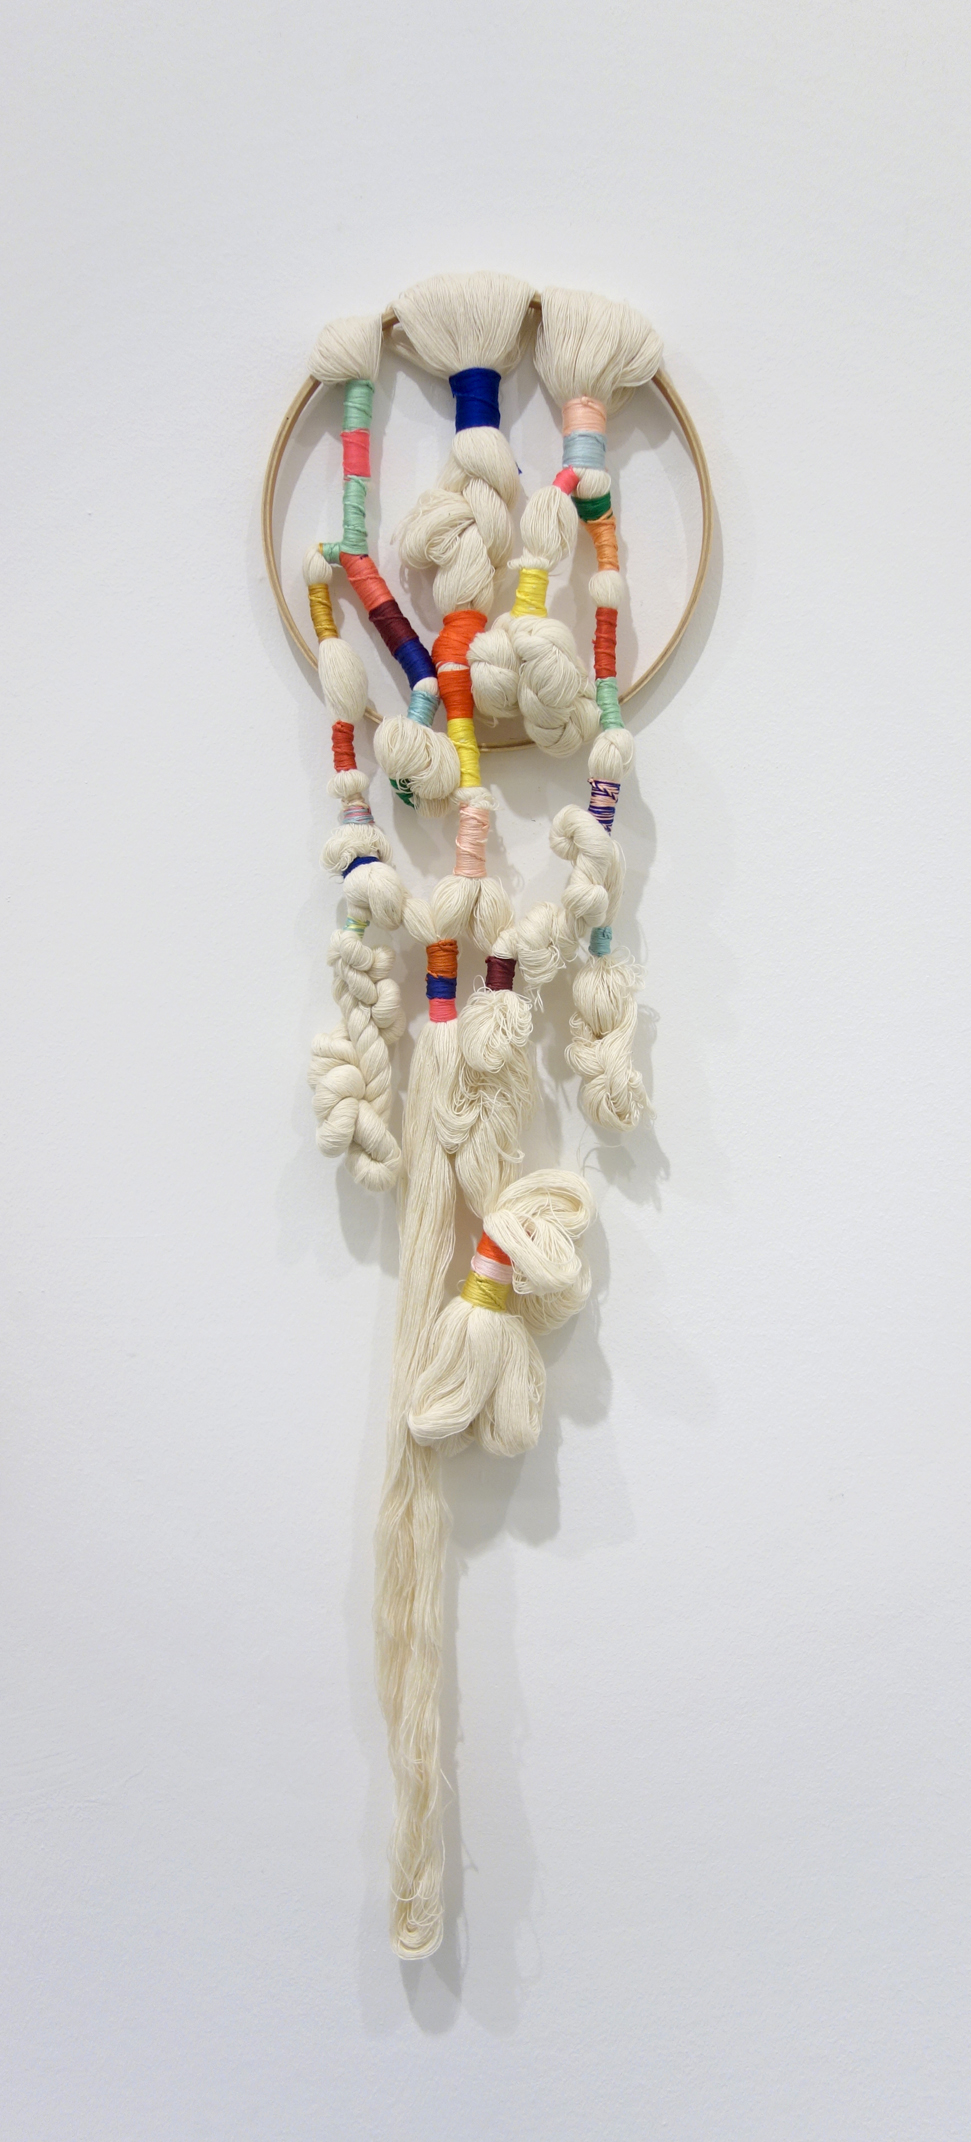  Izziyana Suhaimi  Cross Section of Bone I  2015 Cotton thread; plaided and twisted on wooden hoop H75 x W21 cm 